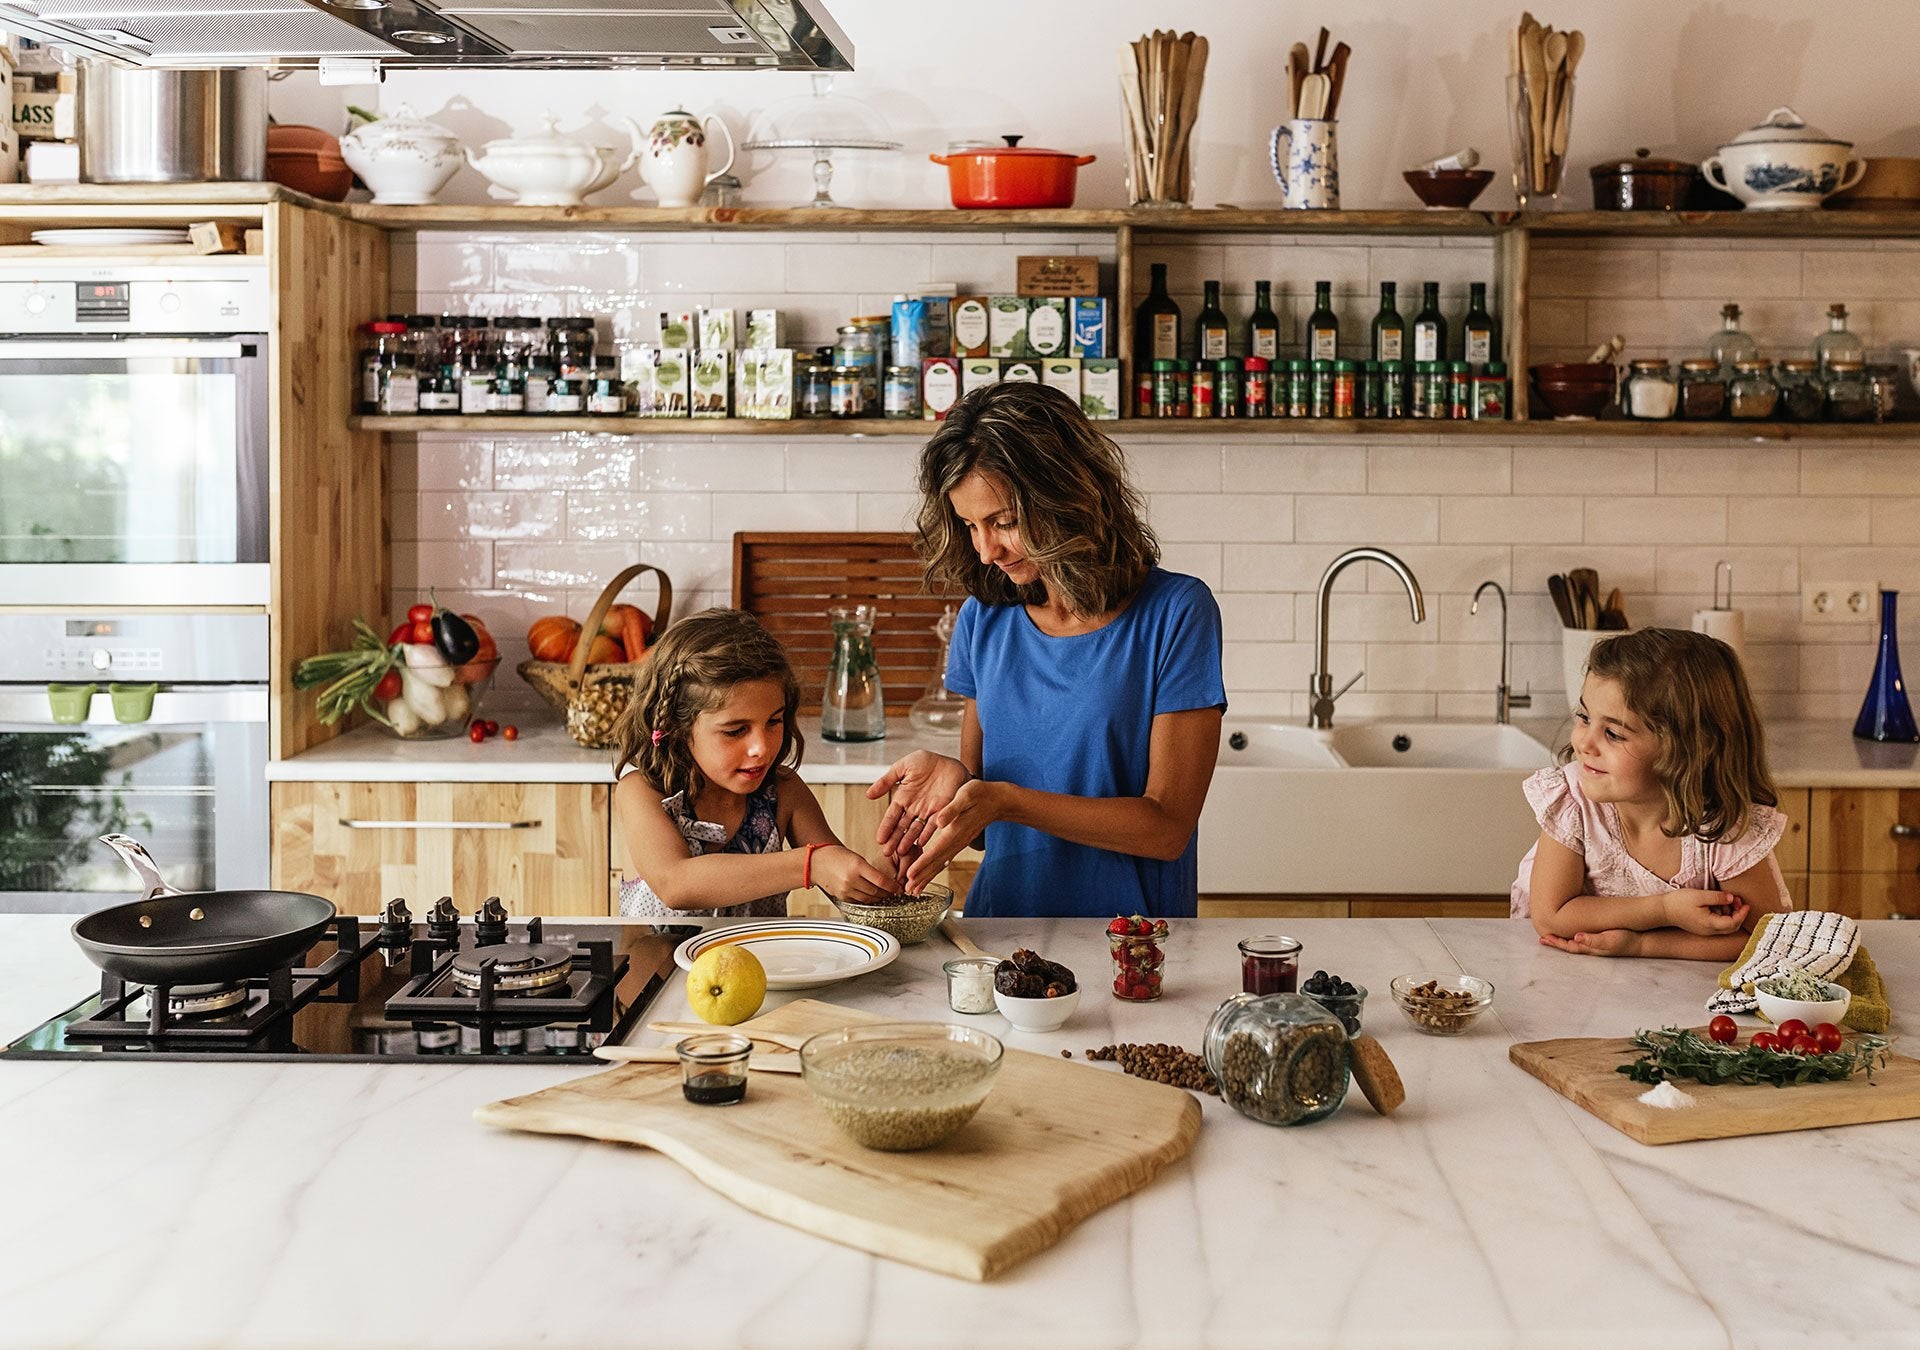 A mother and two daughters cooking together in a well-organized kitchen with various ingredients and cooking utensils on the counter and shelves.